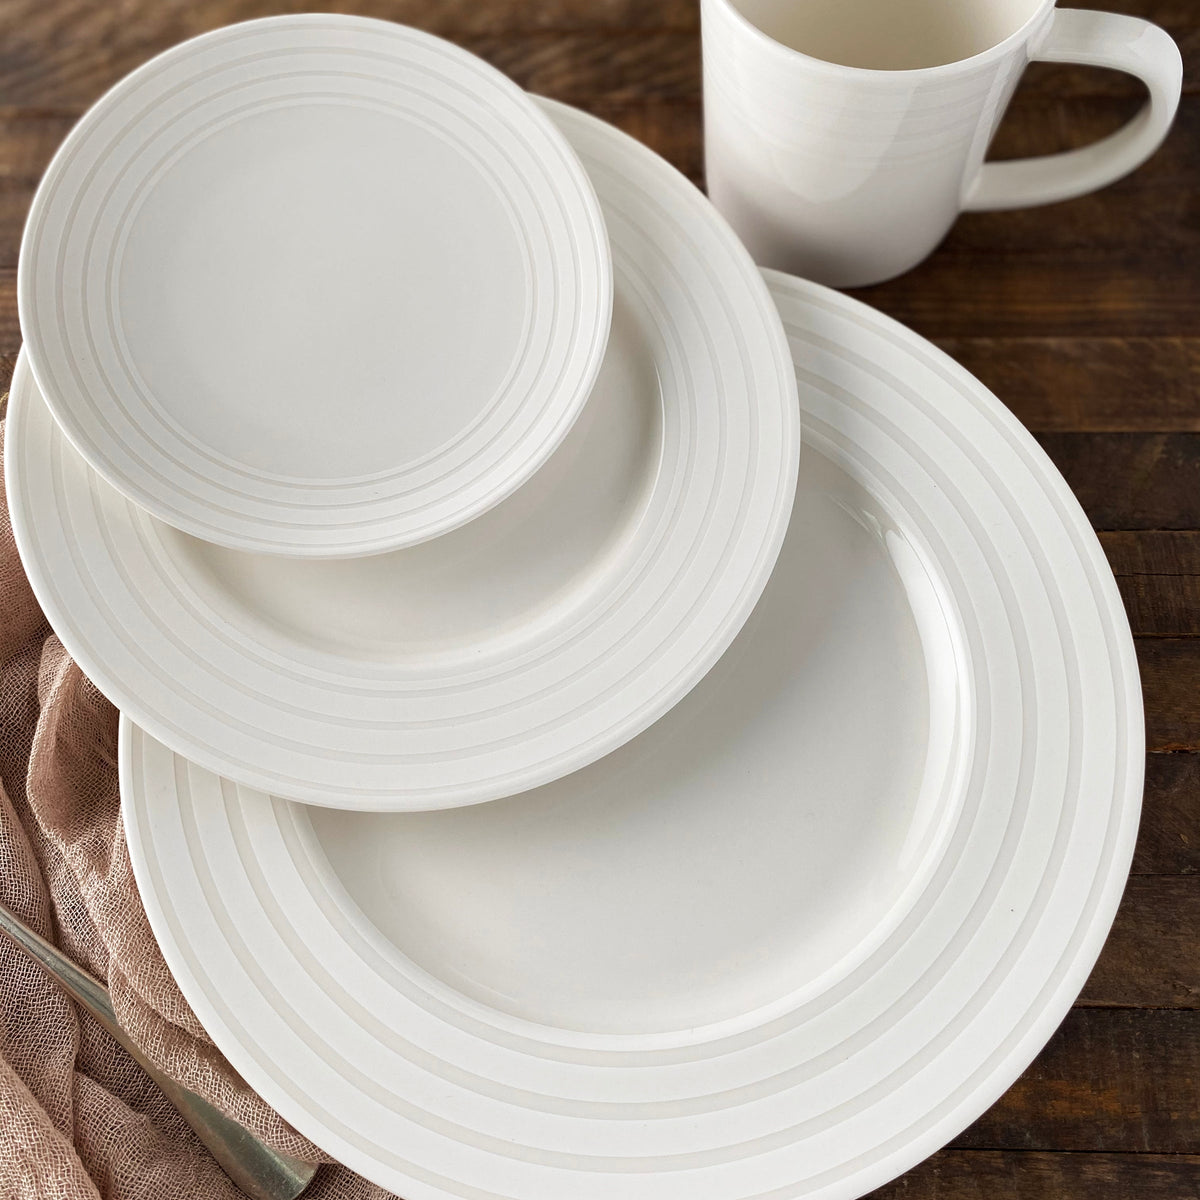 A white ceramic dinner set consisting of a large plate, a medium plate, Cambridge Stripe Small Plates by Caskata Artisanal Home, and a mug on a wooden surface. A pink cloth and a fork are partially visible, creating an inviting table setting.